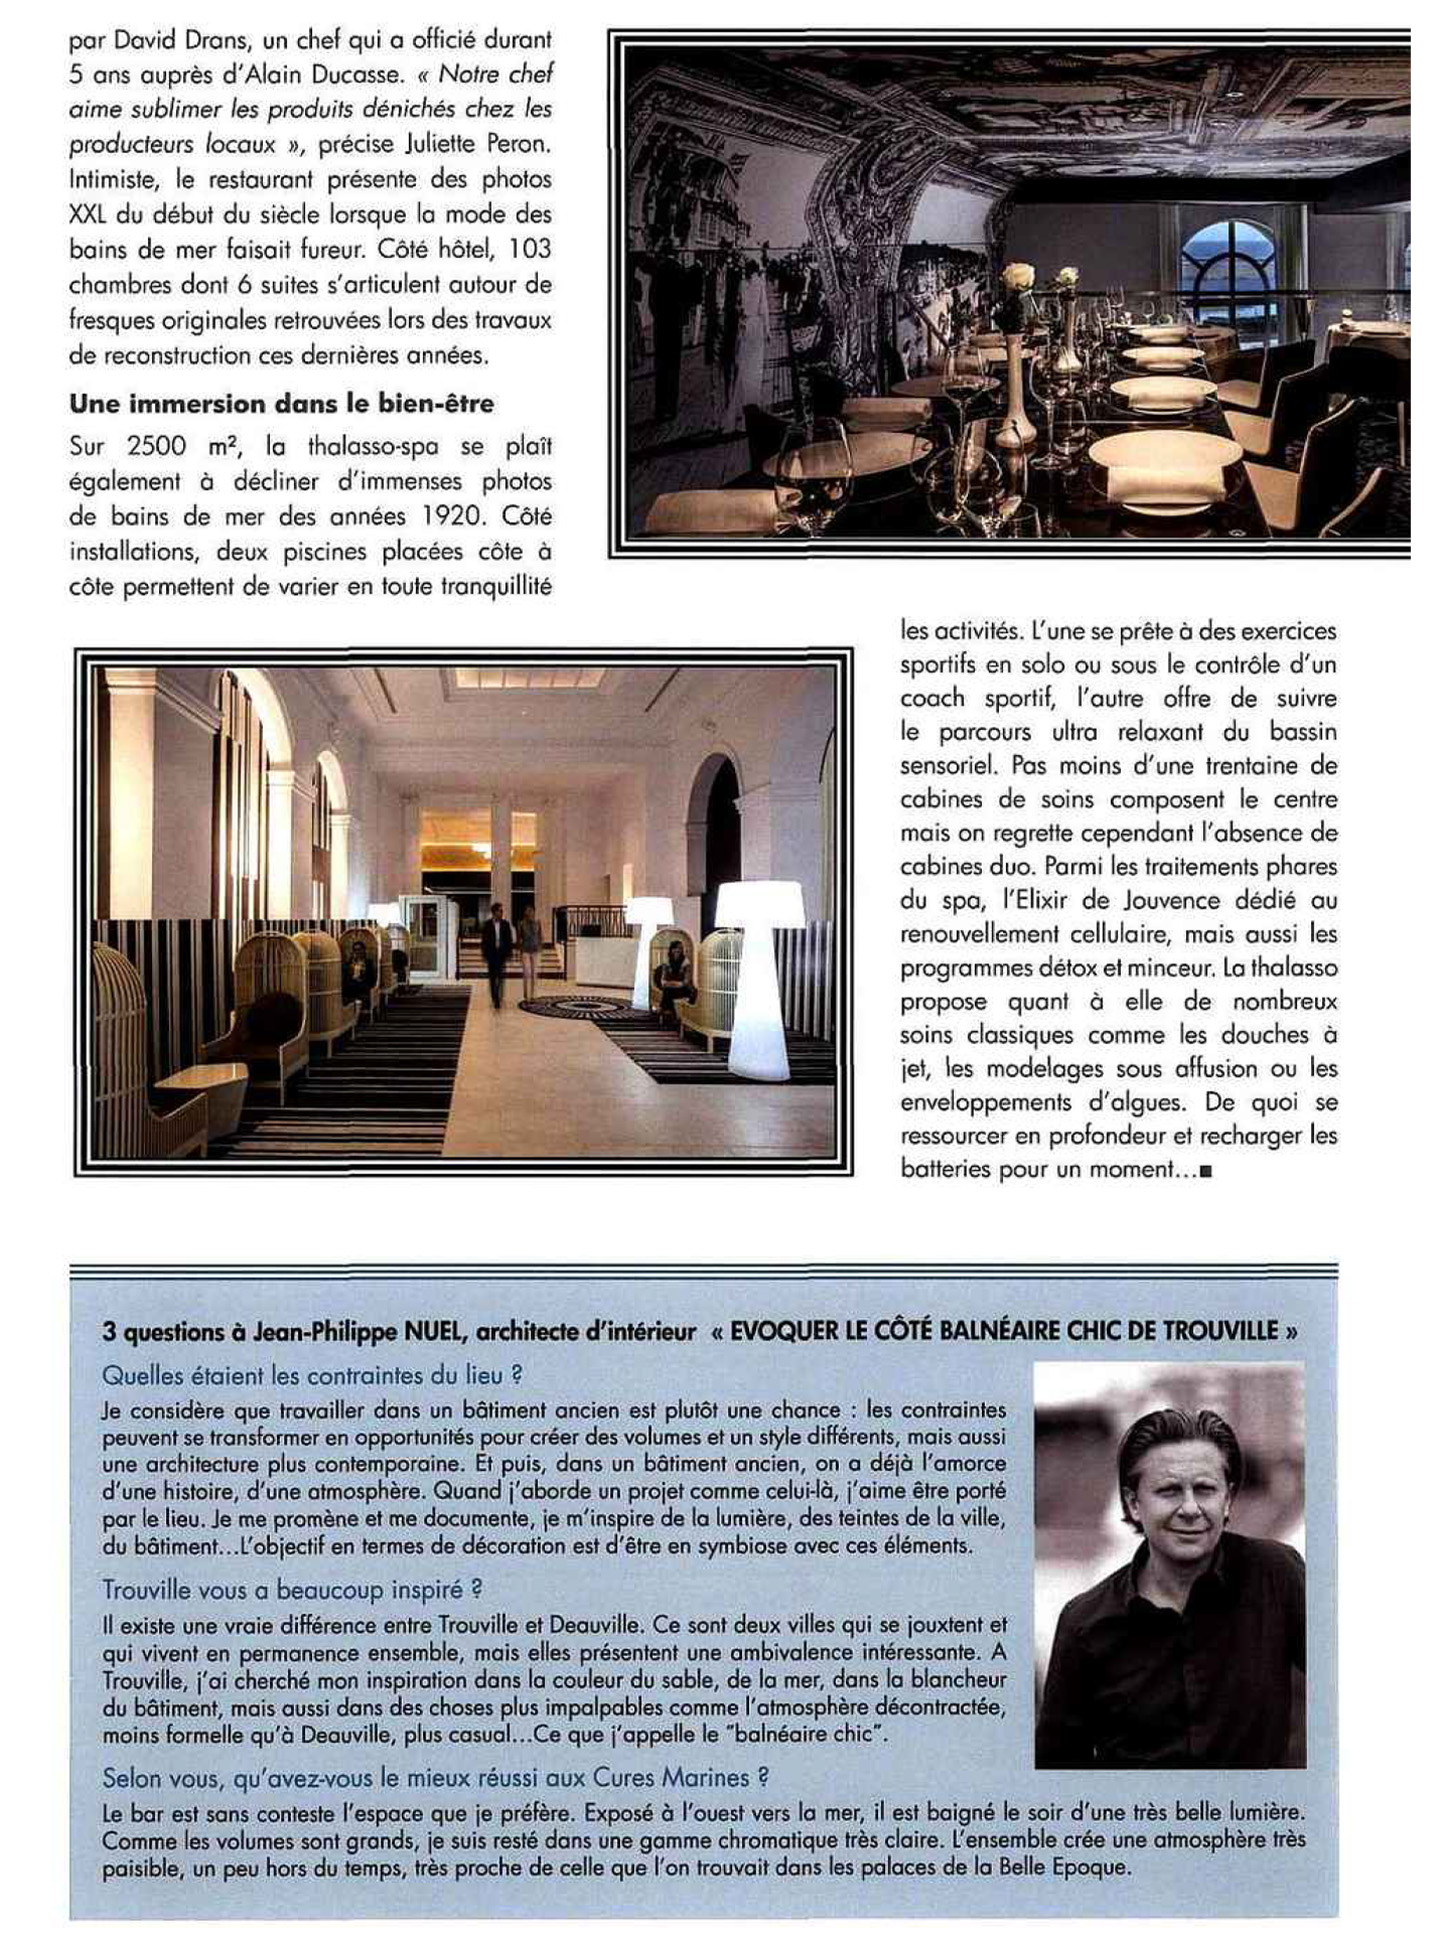 article on the trouville marine cures created by the interior design studio jean-philippe nuel in the magazine univers luxe, hotel et spa 5 étoiles